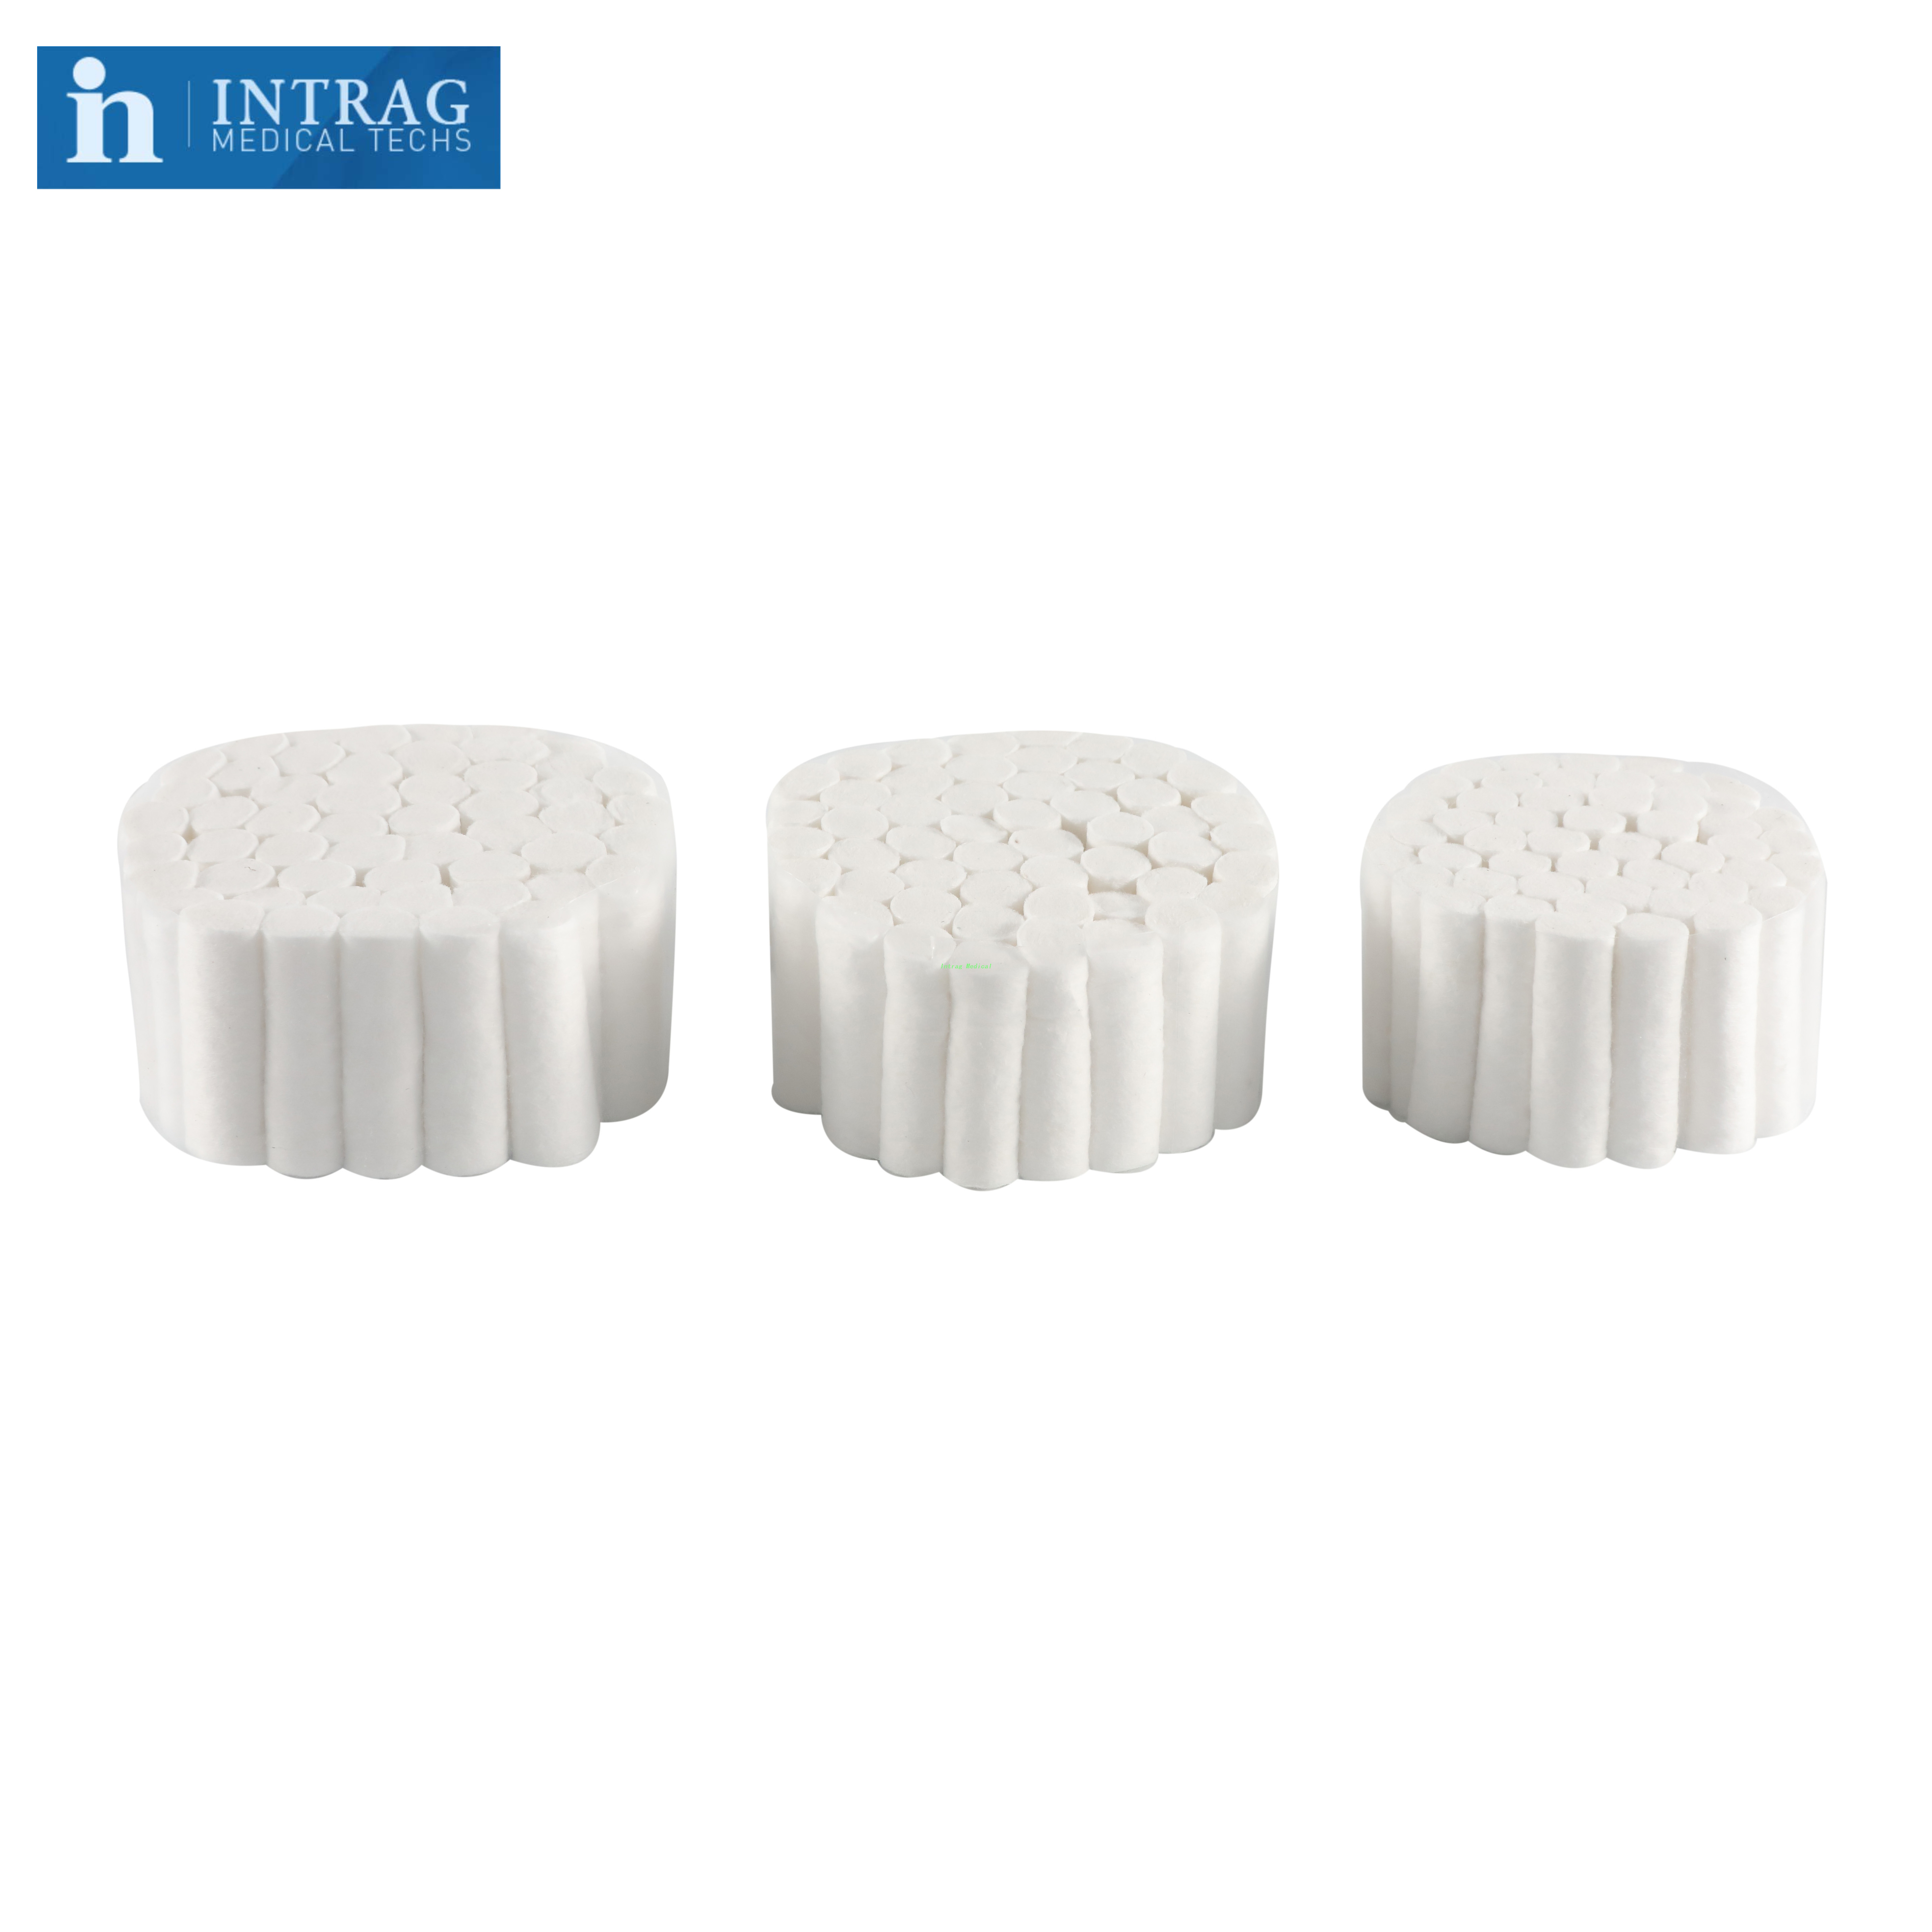 100% Pure Cotton Dental Cotton Roll For Dental Use